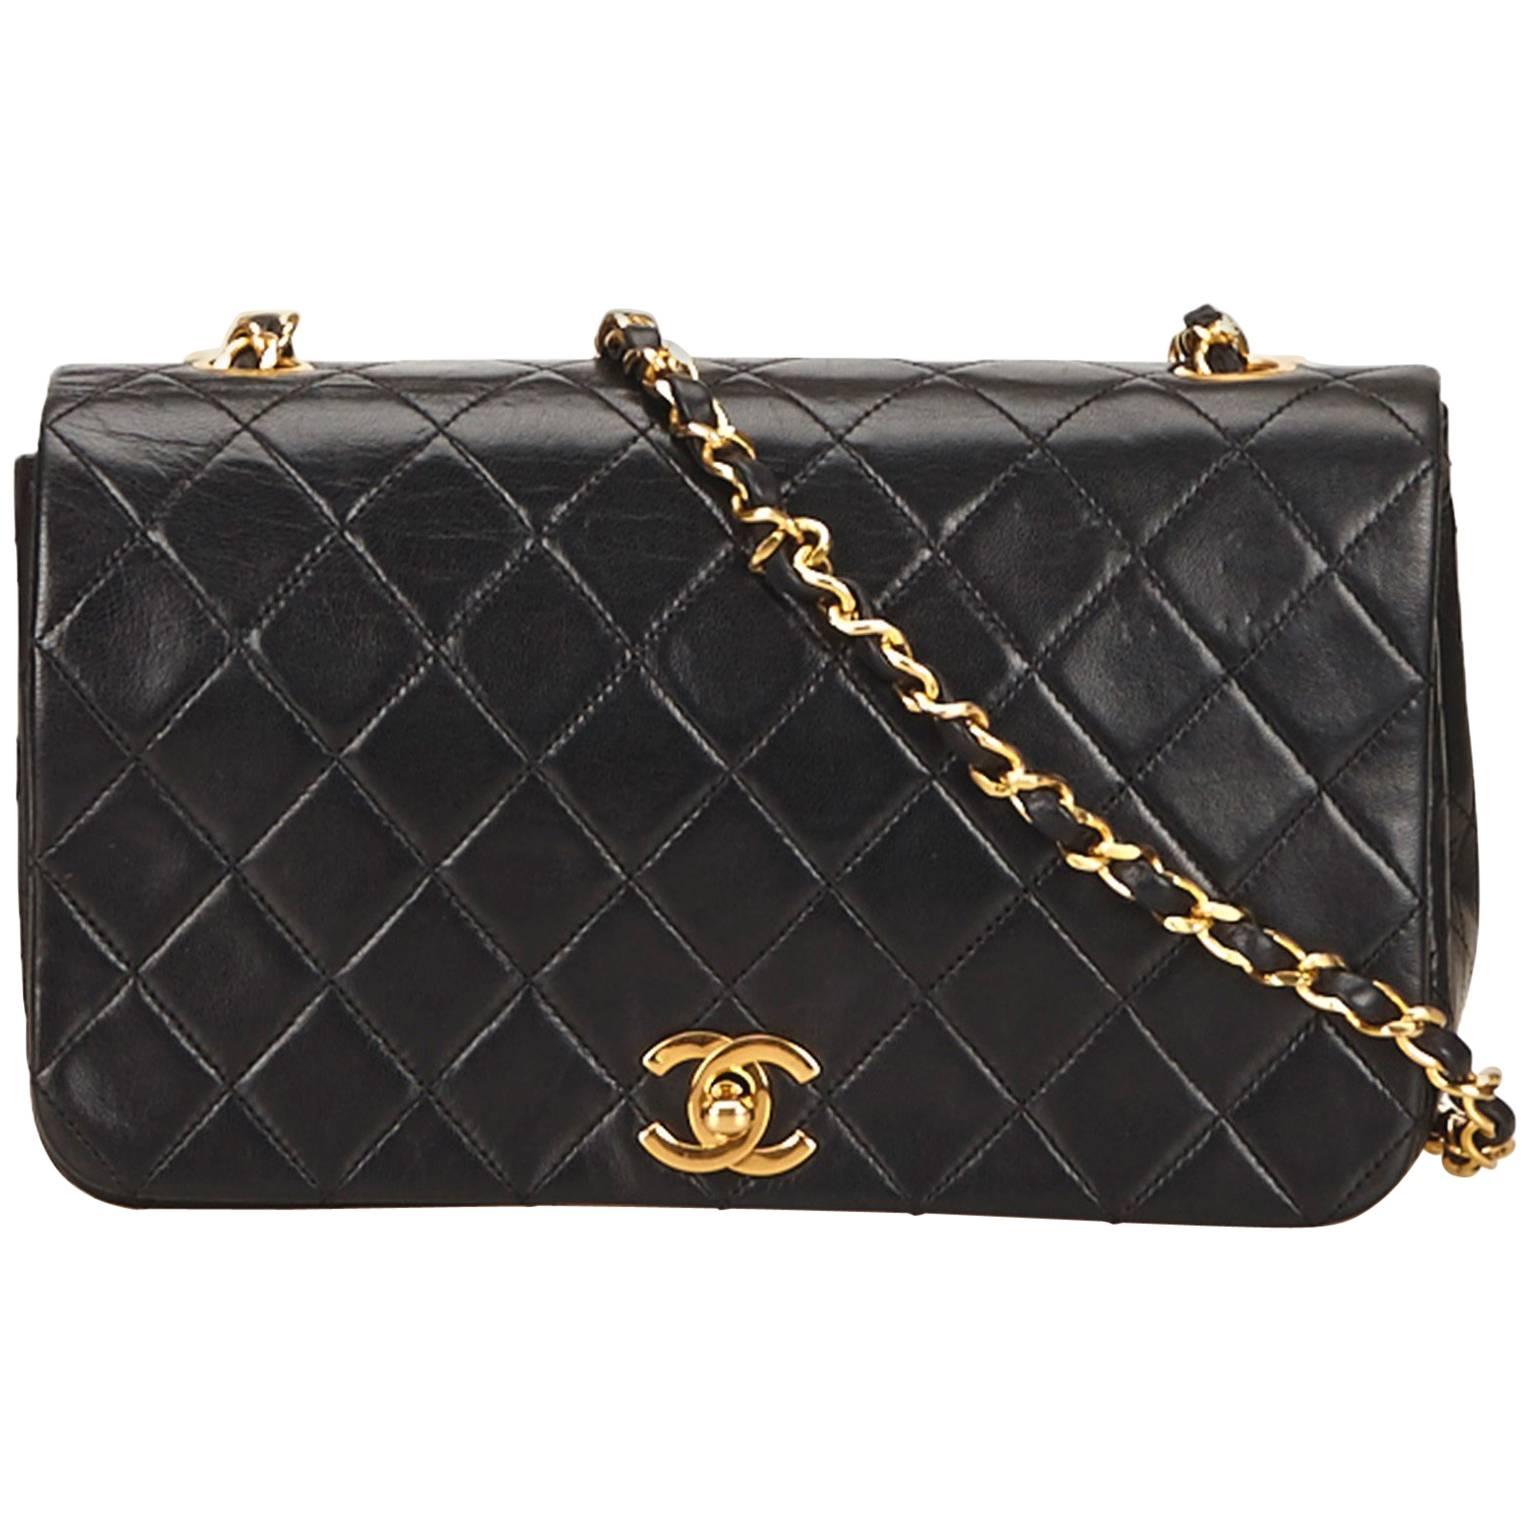 Black Chanel Quilted Lambskin Flap Bag